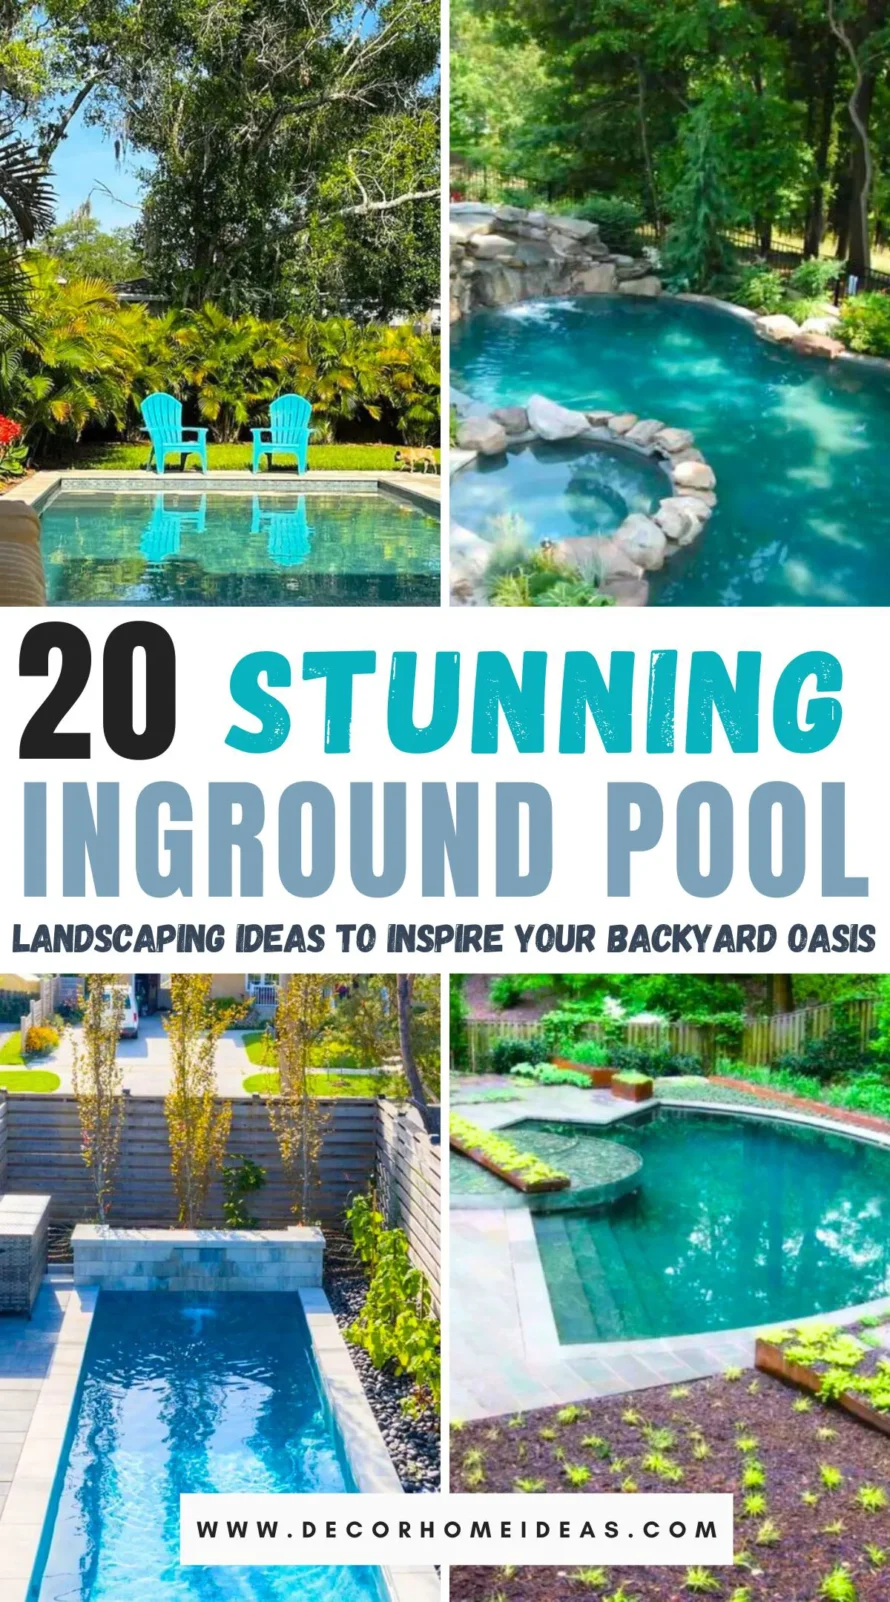 Transform your backyard into a paradise with these 20 stunning inground pool landscaping ideas. From lush greenery and tropical plants to elegant stone pathways and modern minimalist designs, this post offers a variety of inspirations to suit any style. Discover how to create a serene and inviting oasis that will make your outdoor space the ultimate retreat. Dive in to find out more!